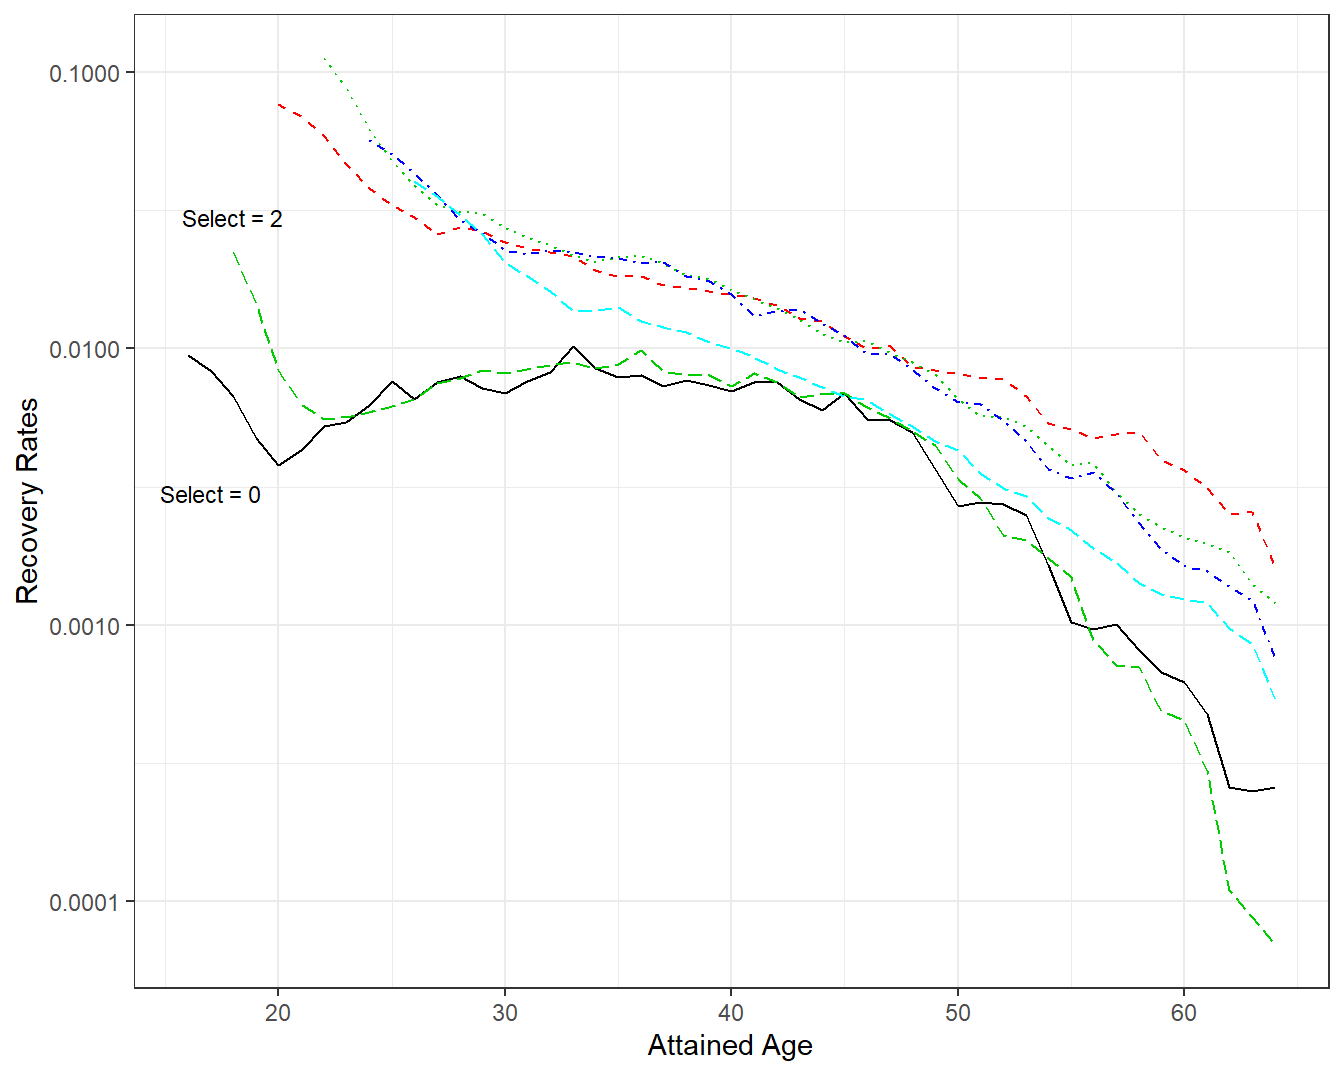 Disability Recovery Rates by Attained Age and Select Period. A plot of recovery rates \(q_x^r\) by attained age \(x\). Each line represents a different select period. The lines for select 0 and 2 are similar, other lines are also similar, suggesting that selection effects have worn out beginning at select = 4.